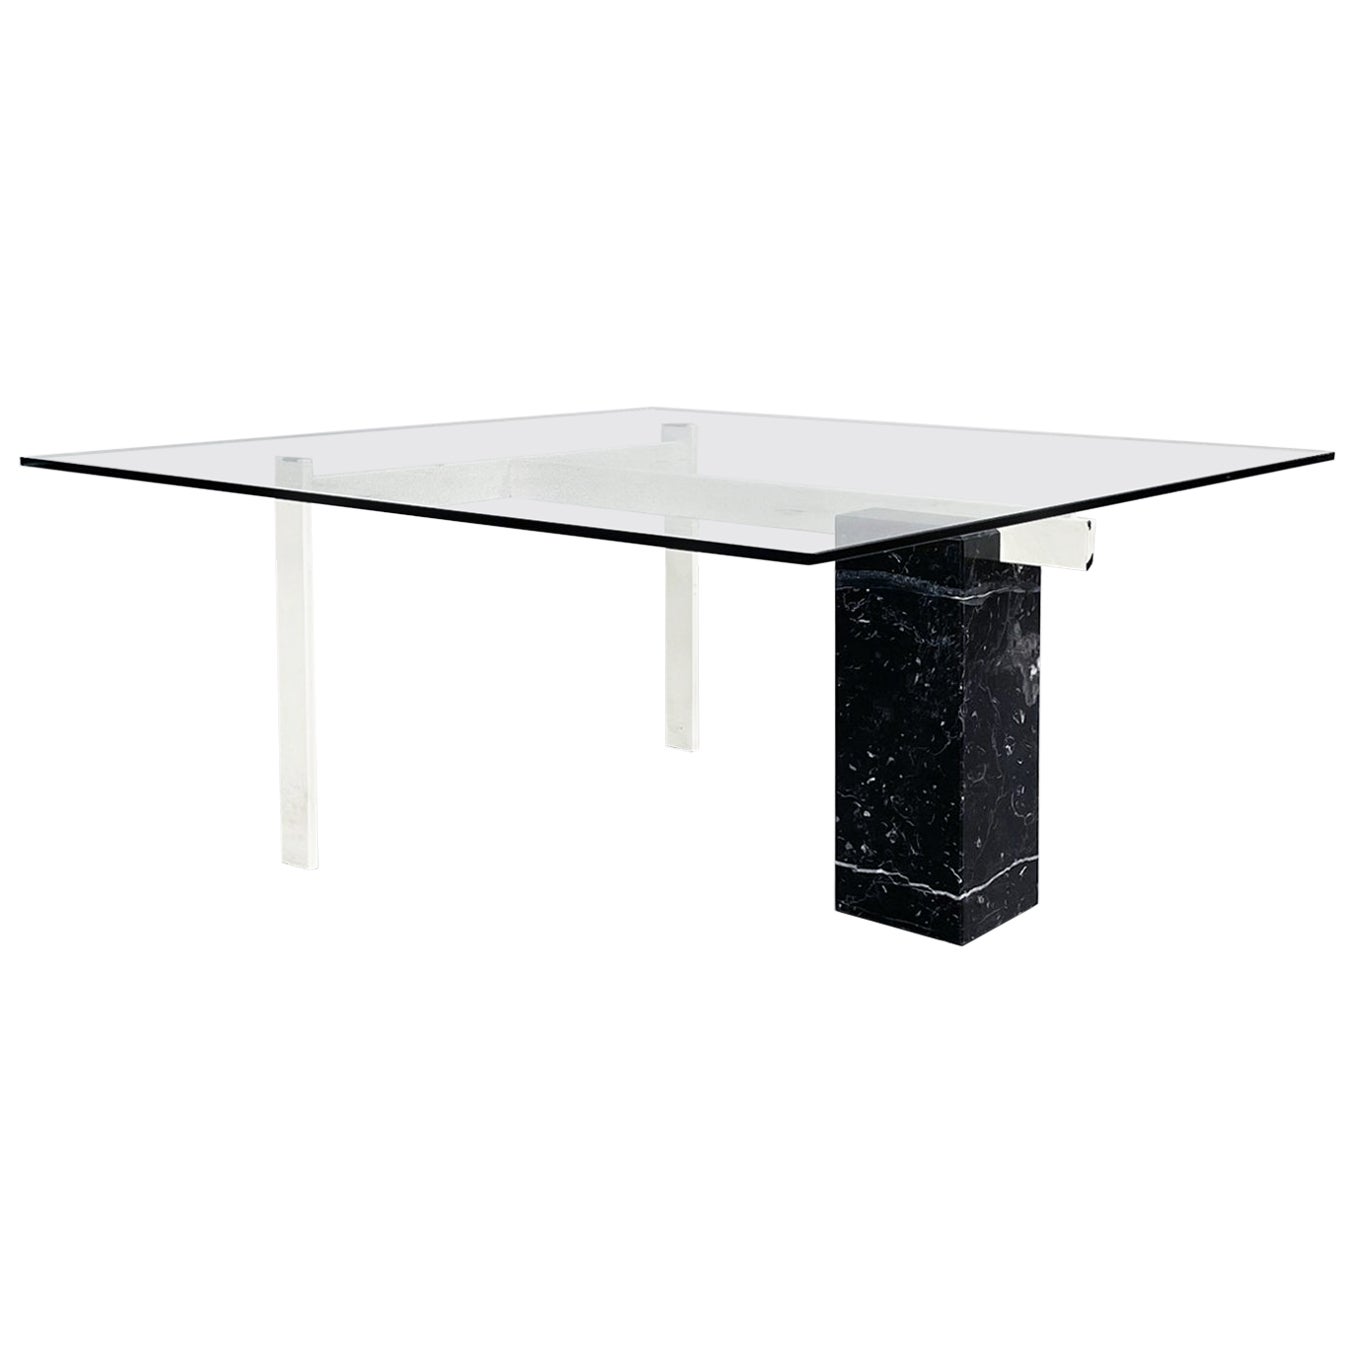 Italian Mid-Century Square Coffee Table Glass, Iron and Marquinia Marble, 1980s For Sale